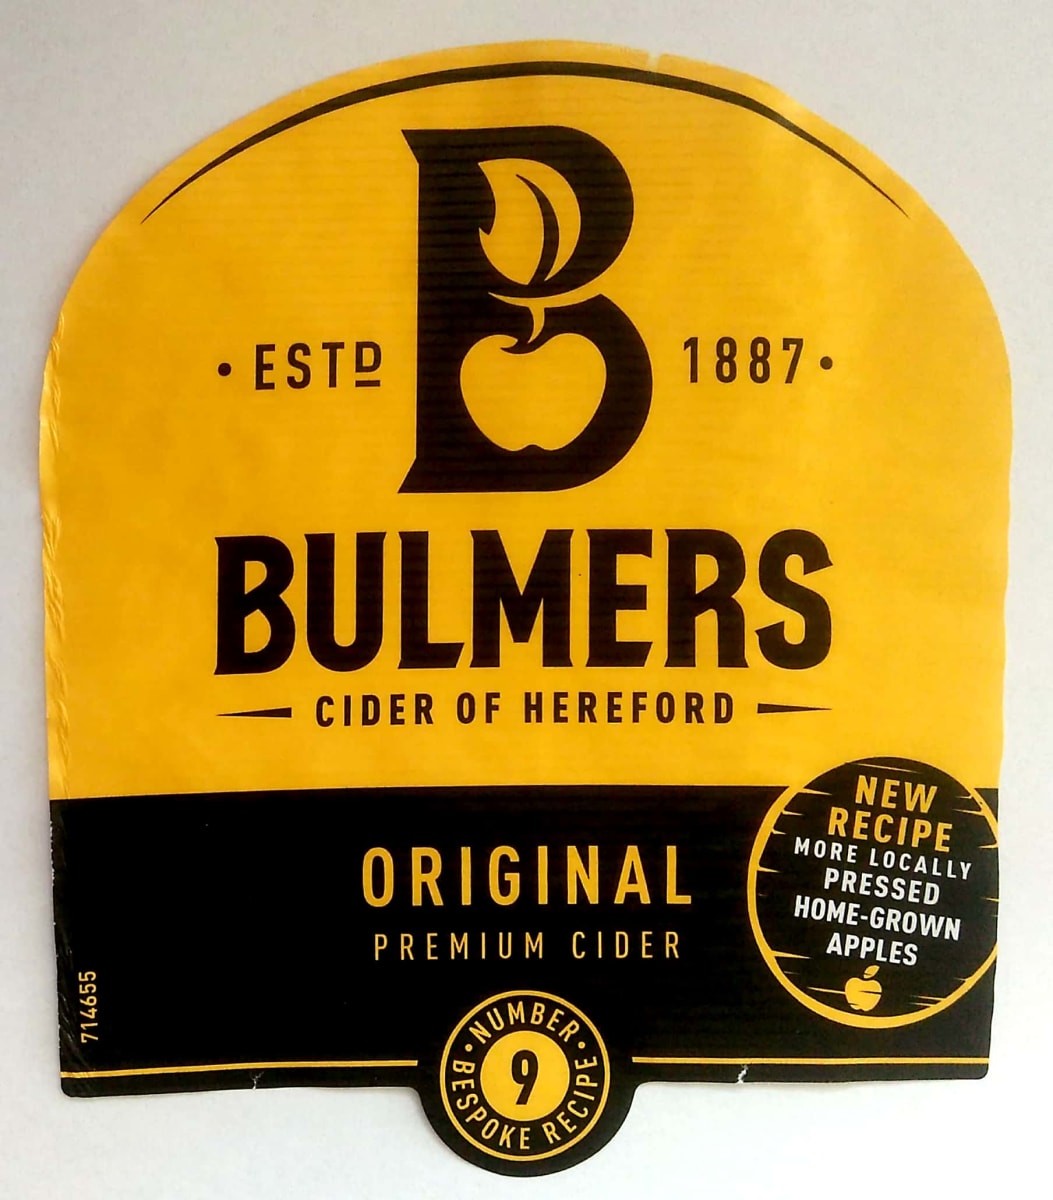 Bulmers Cider of Hereford